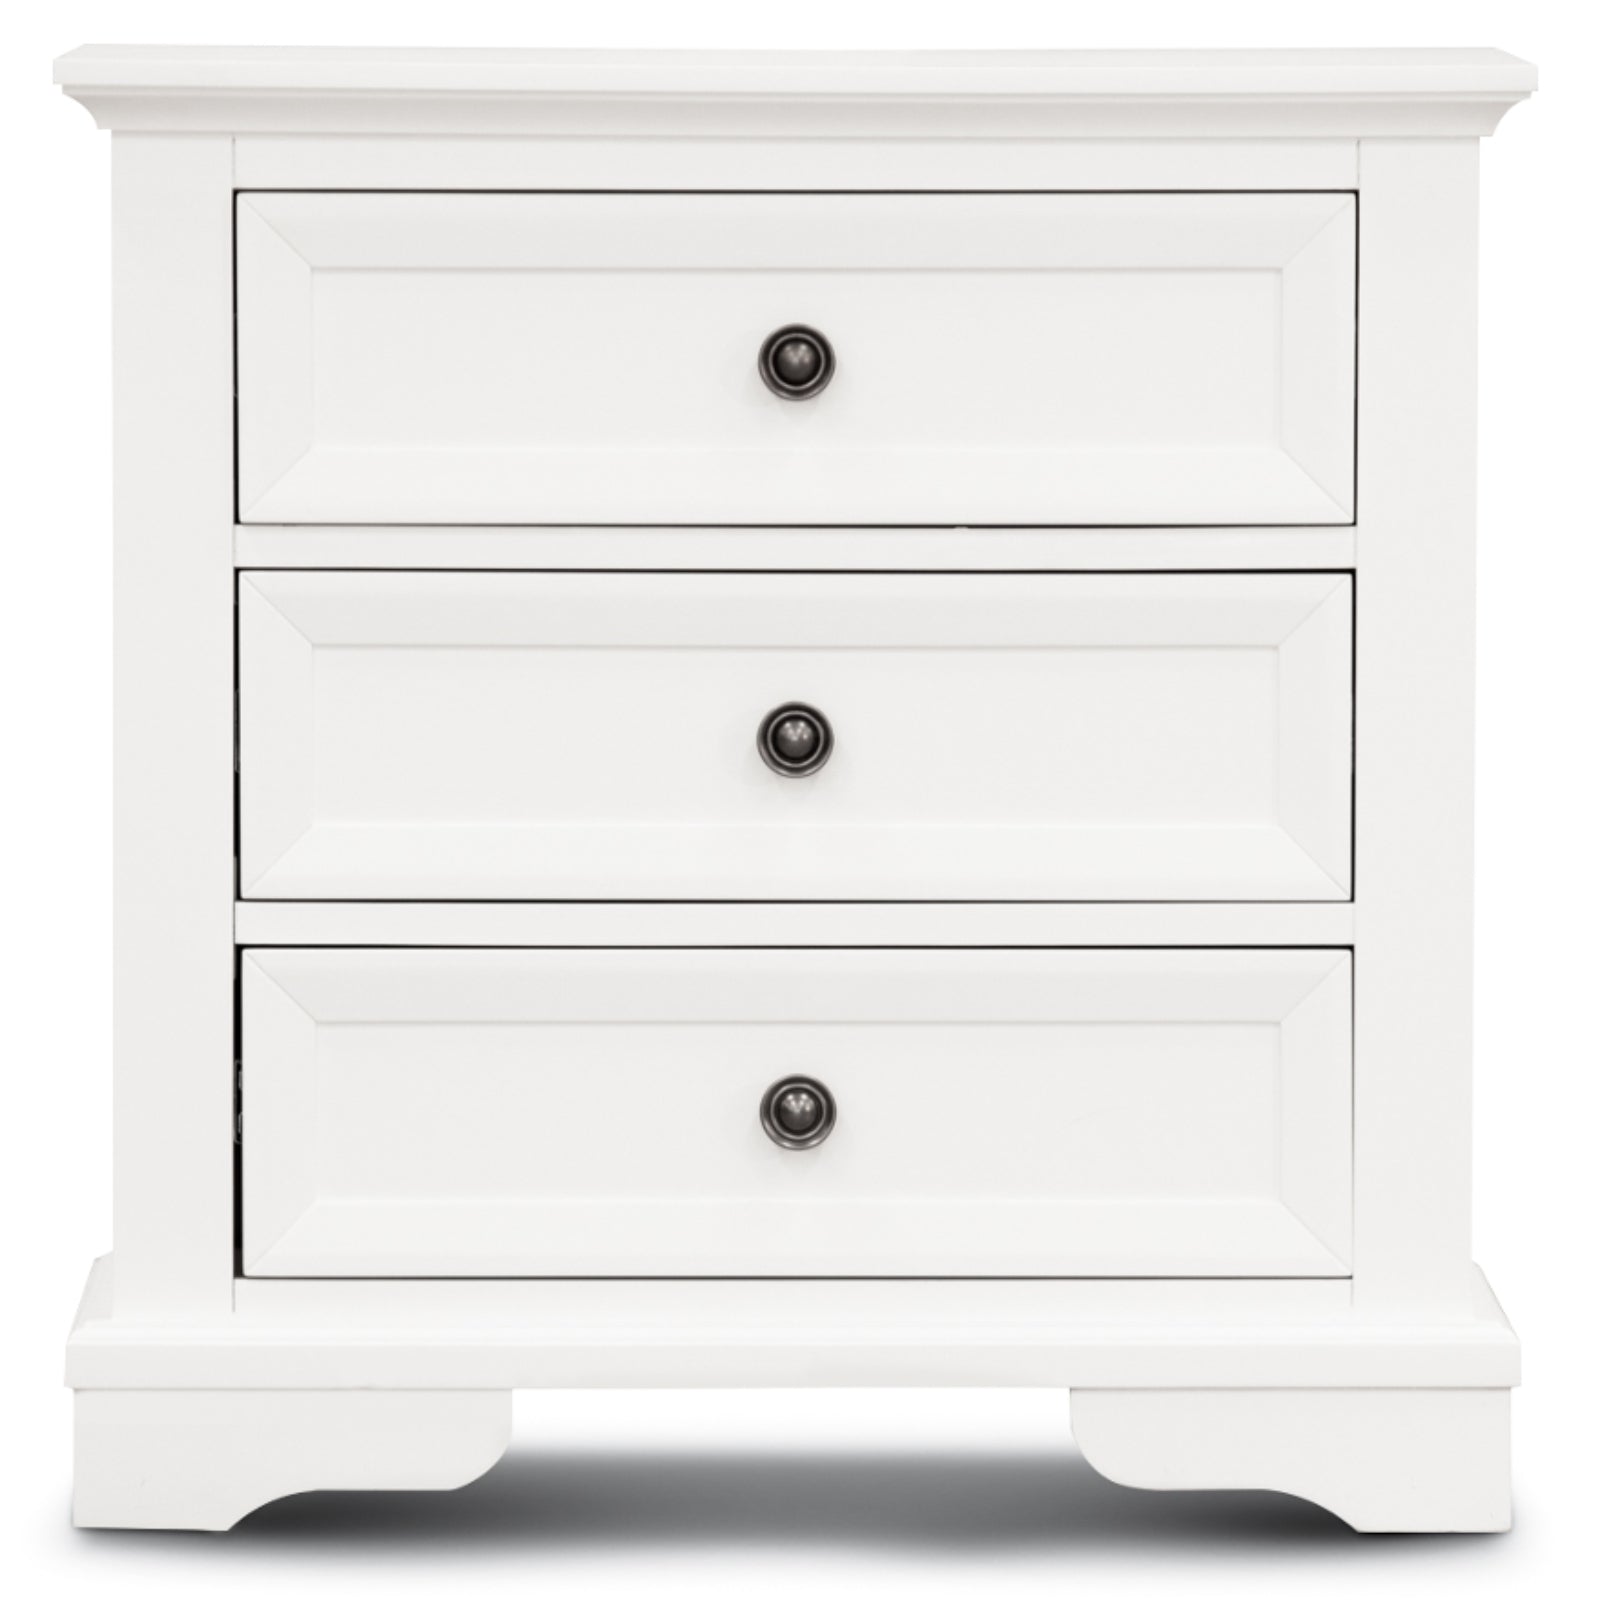 Celosia Bedside Table Set of 2pcs - 3 Drawers Storage Cabinet Nightstand - White